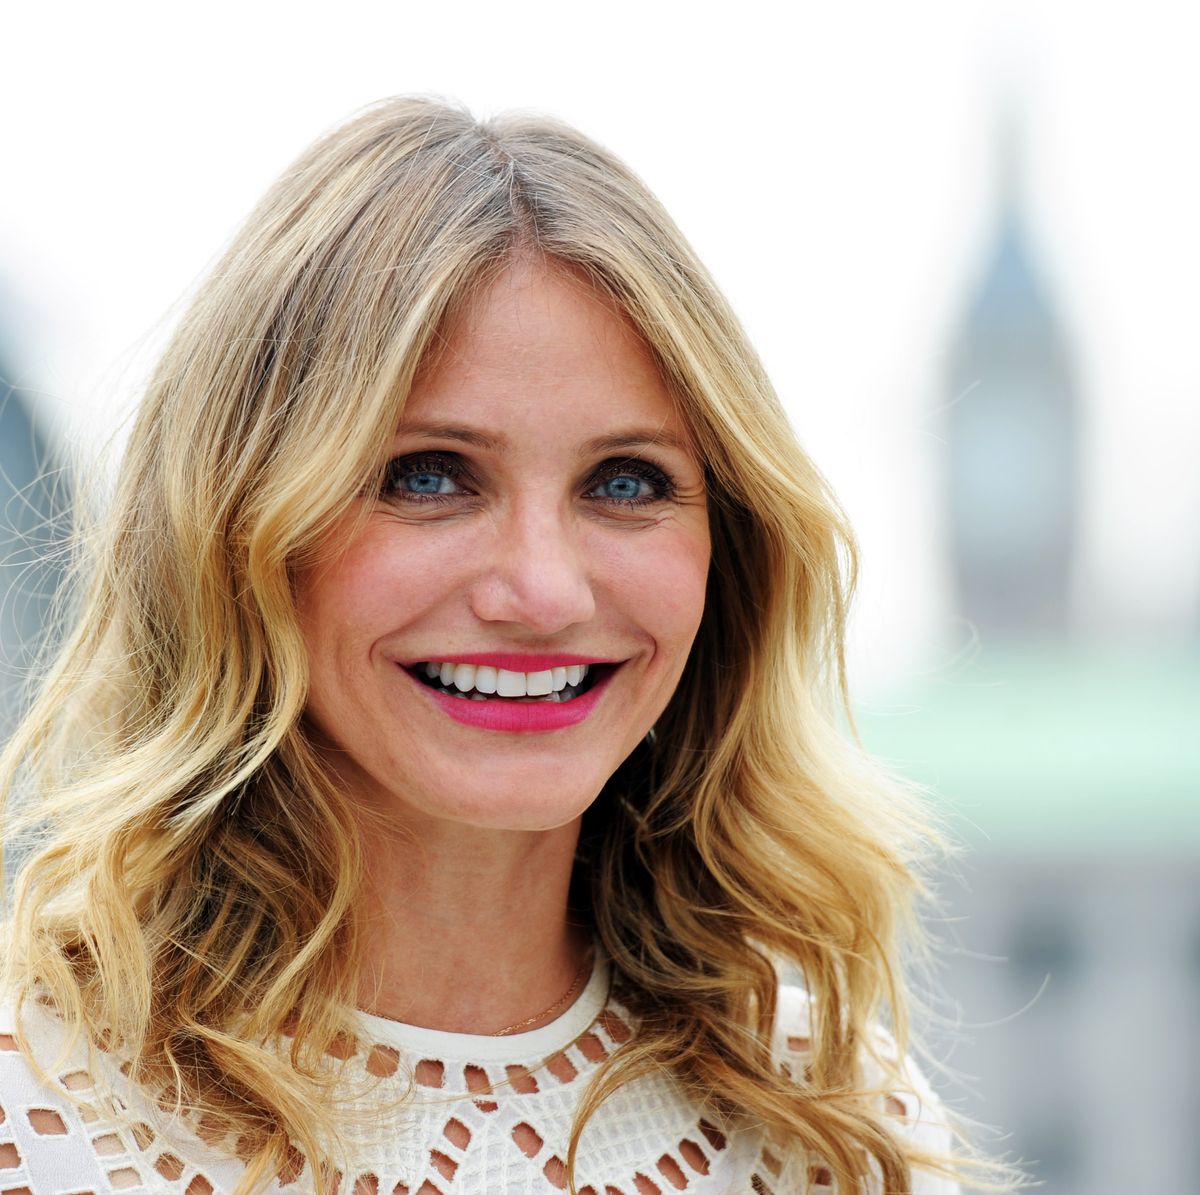 Celebrities like Cameron Diaz and Jennifer Aniston were spotted